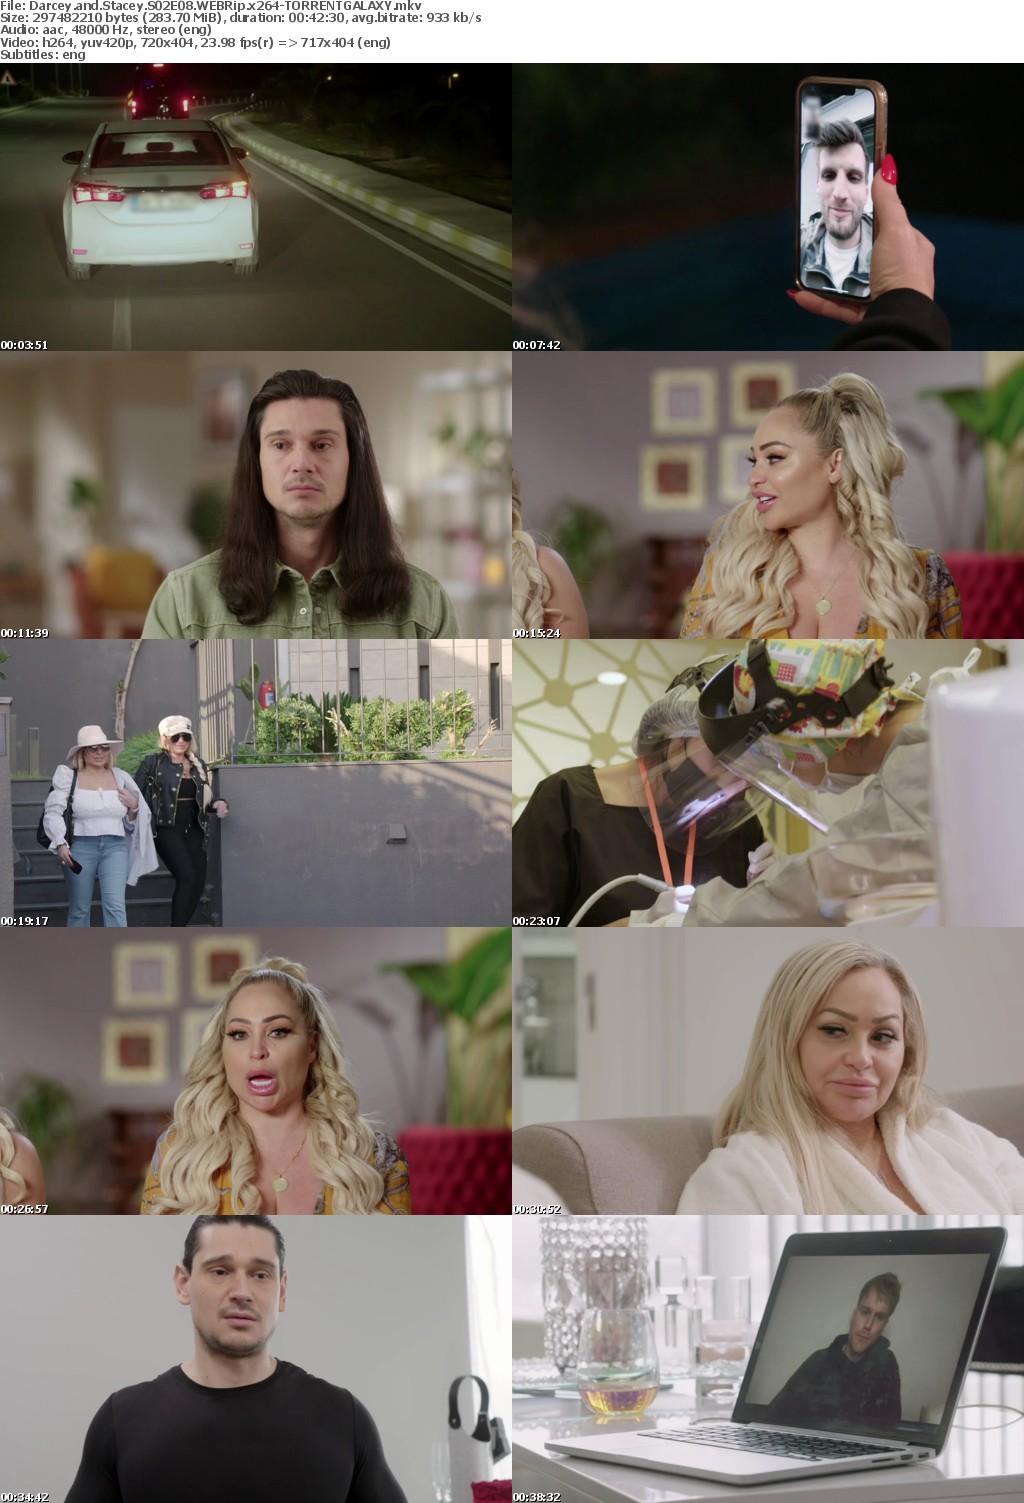 Darcey and Stacey S02E08 WEBRip x264-GALAXY